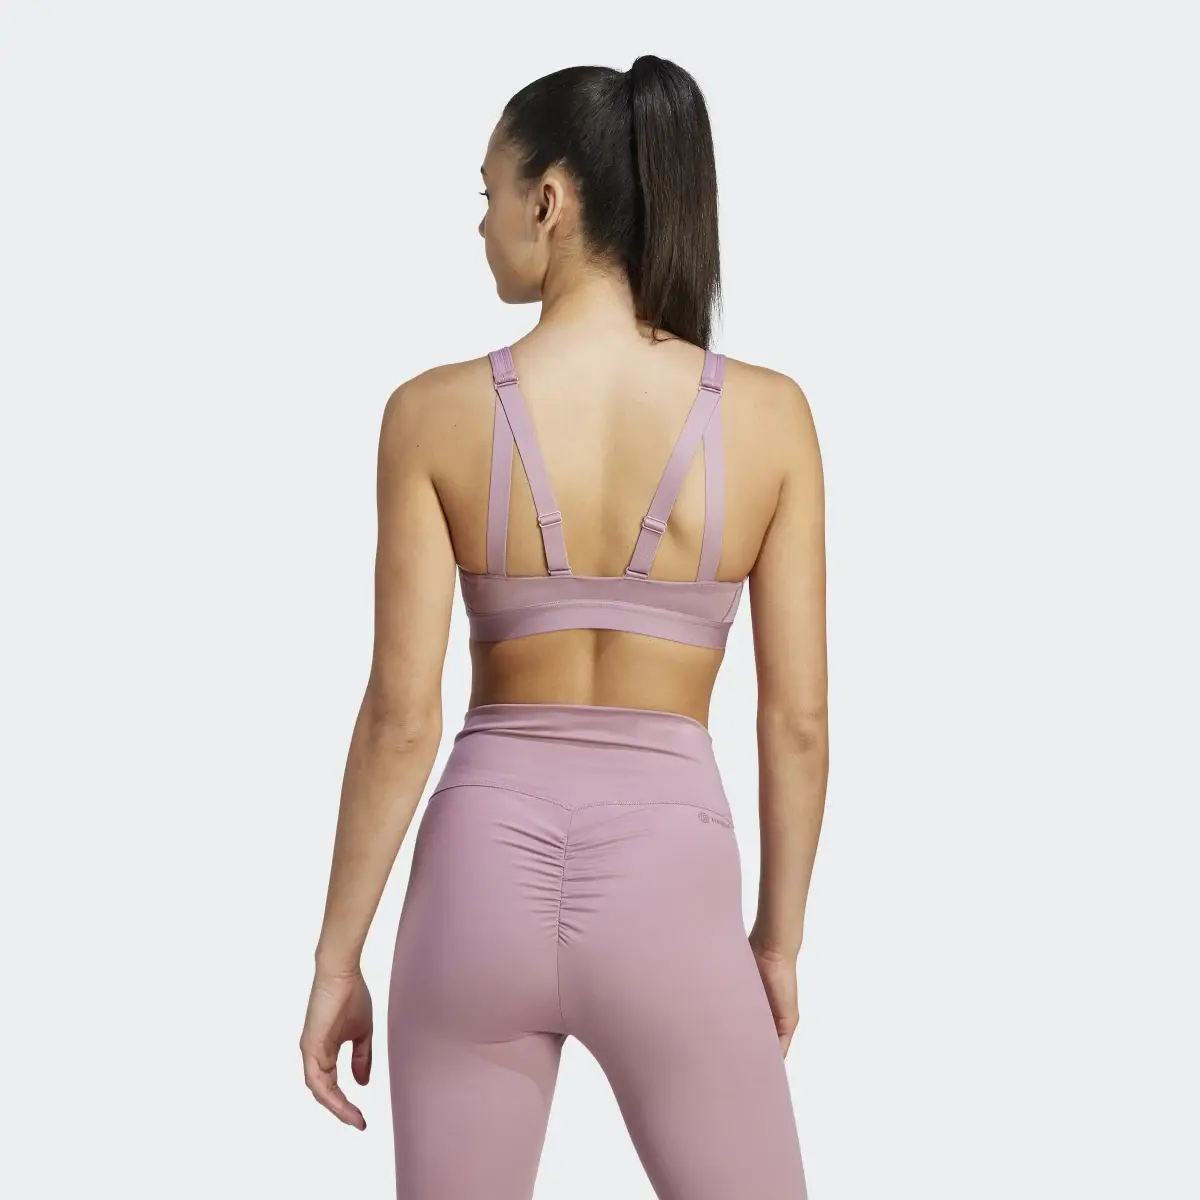 Adidas TLRD Move Training High-Support Bra. 3